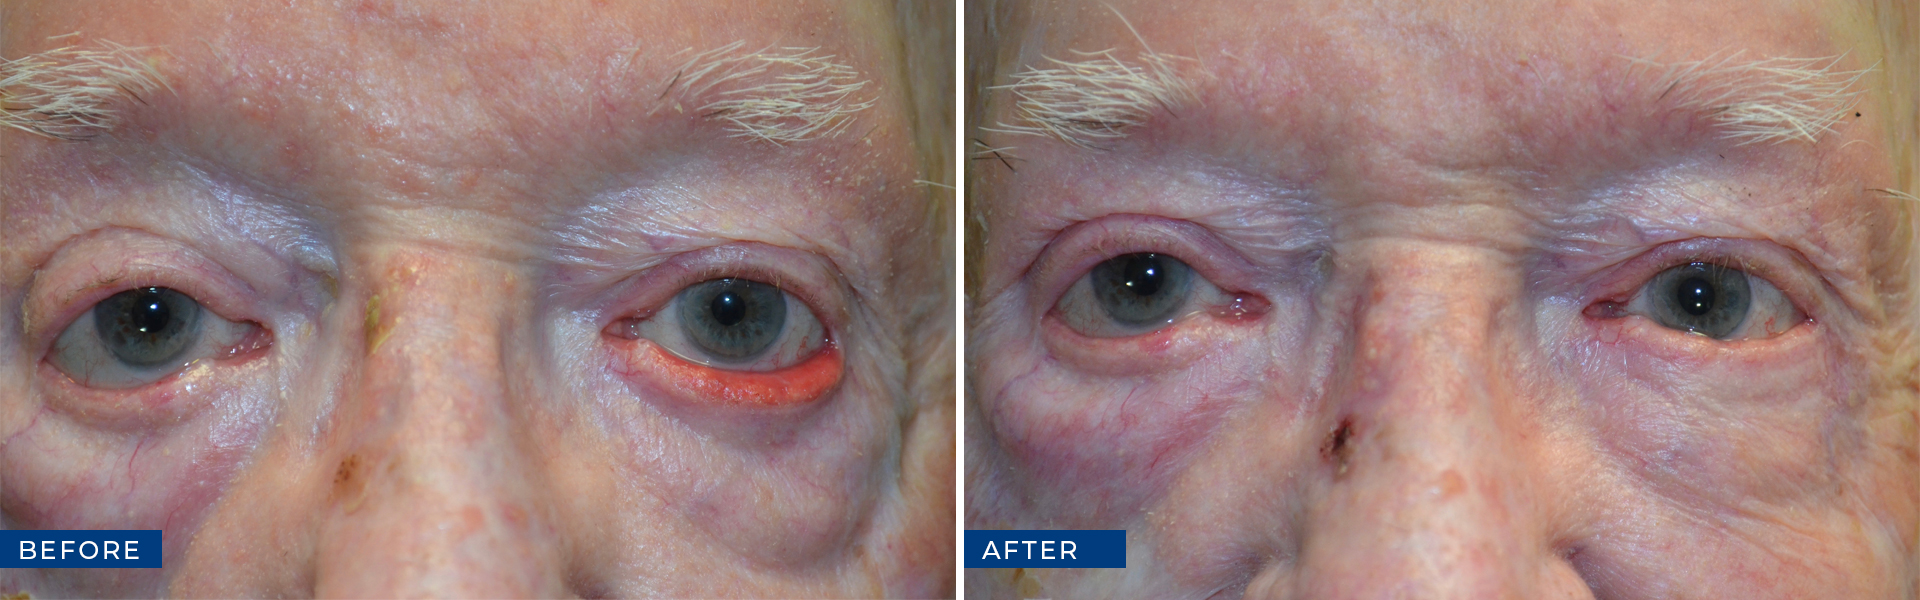 Repaired Ectropion before and after photo